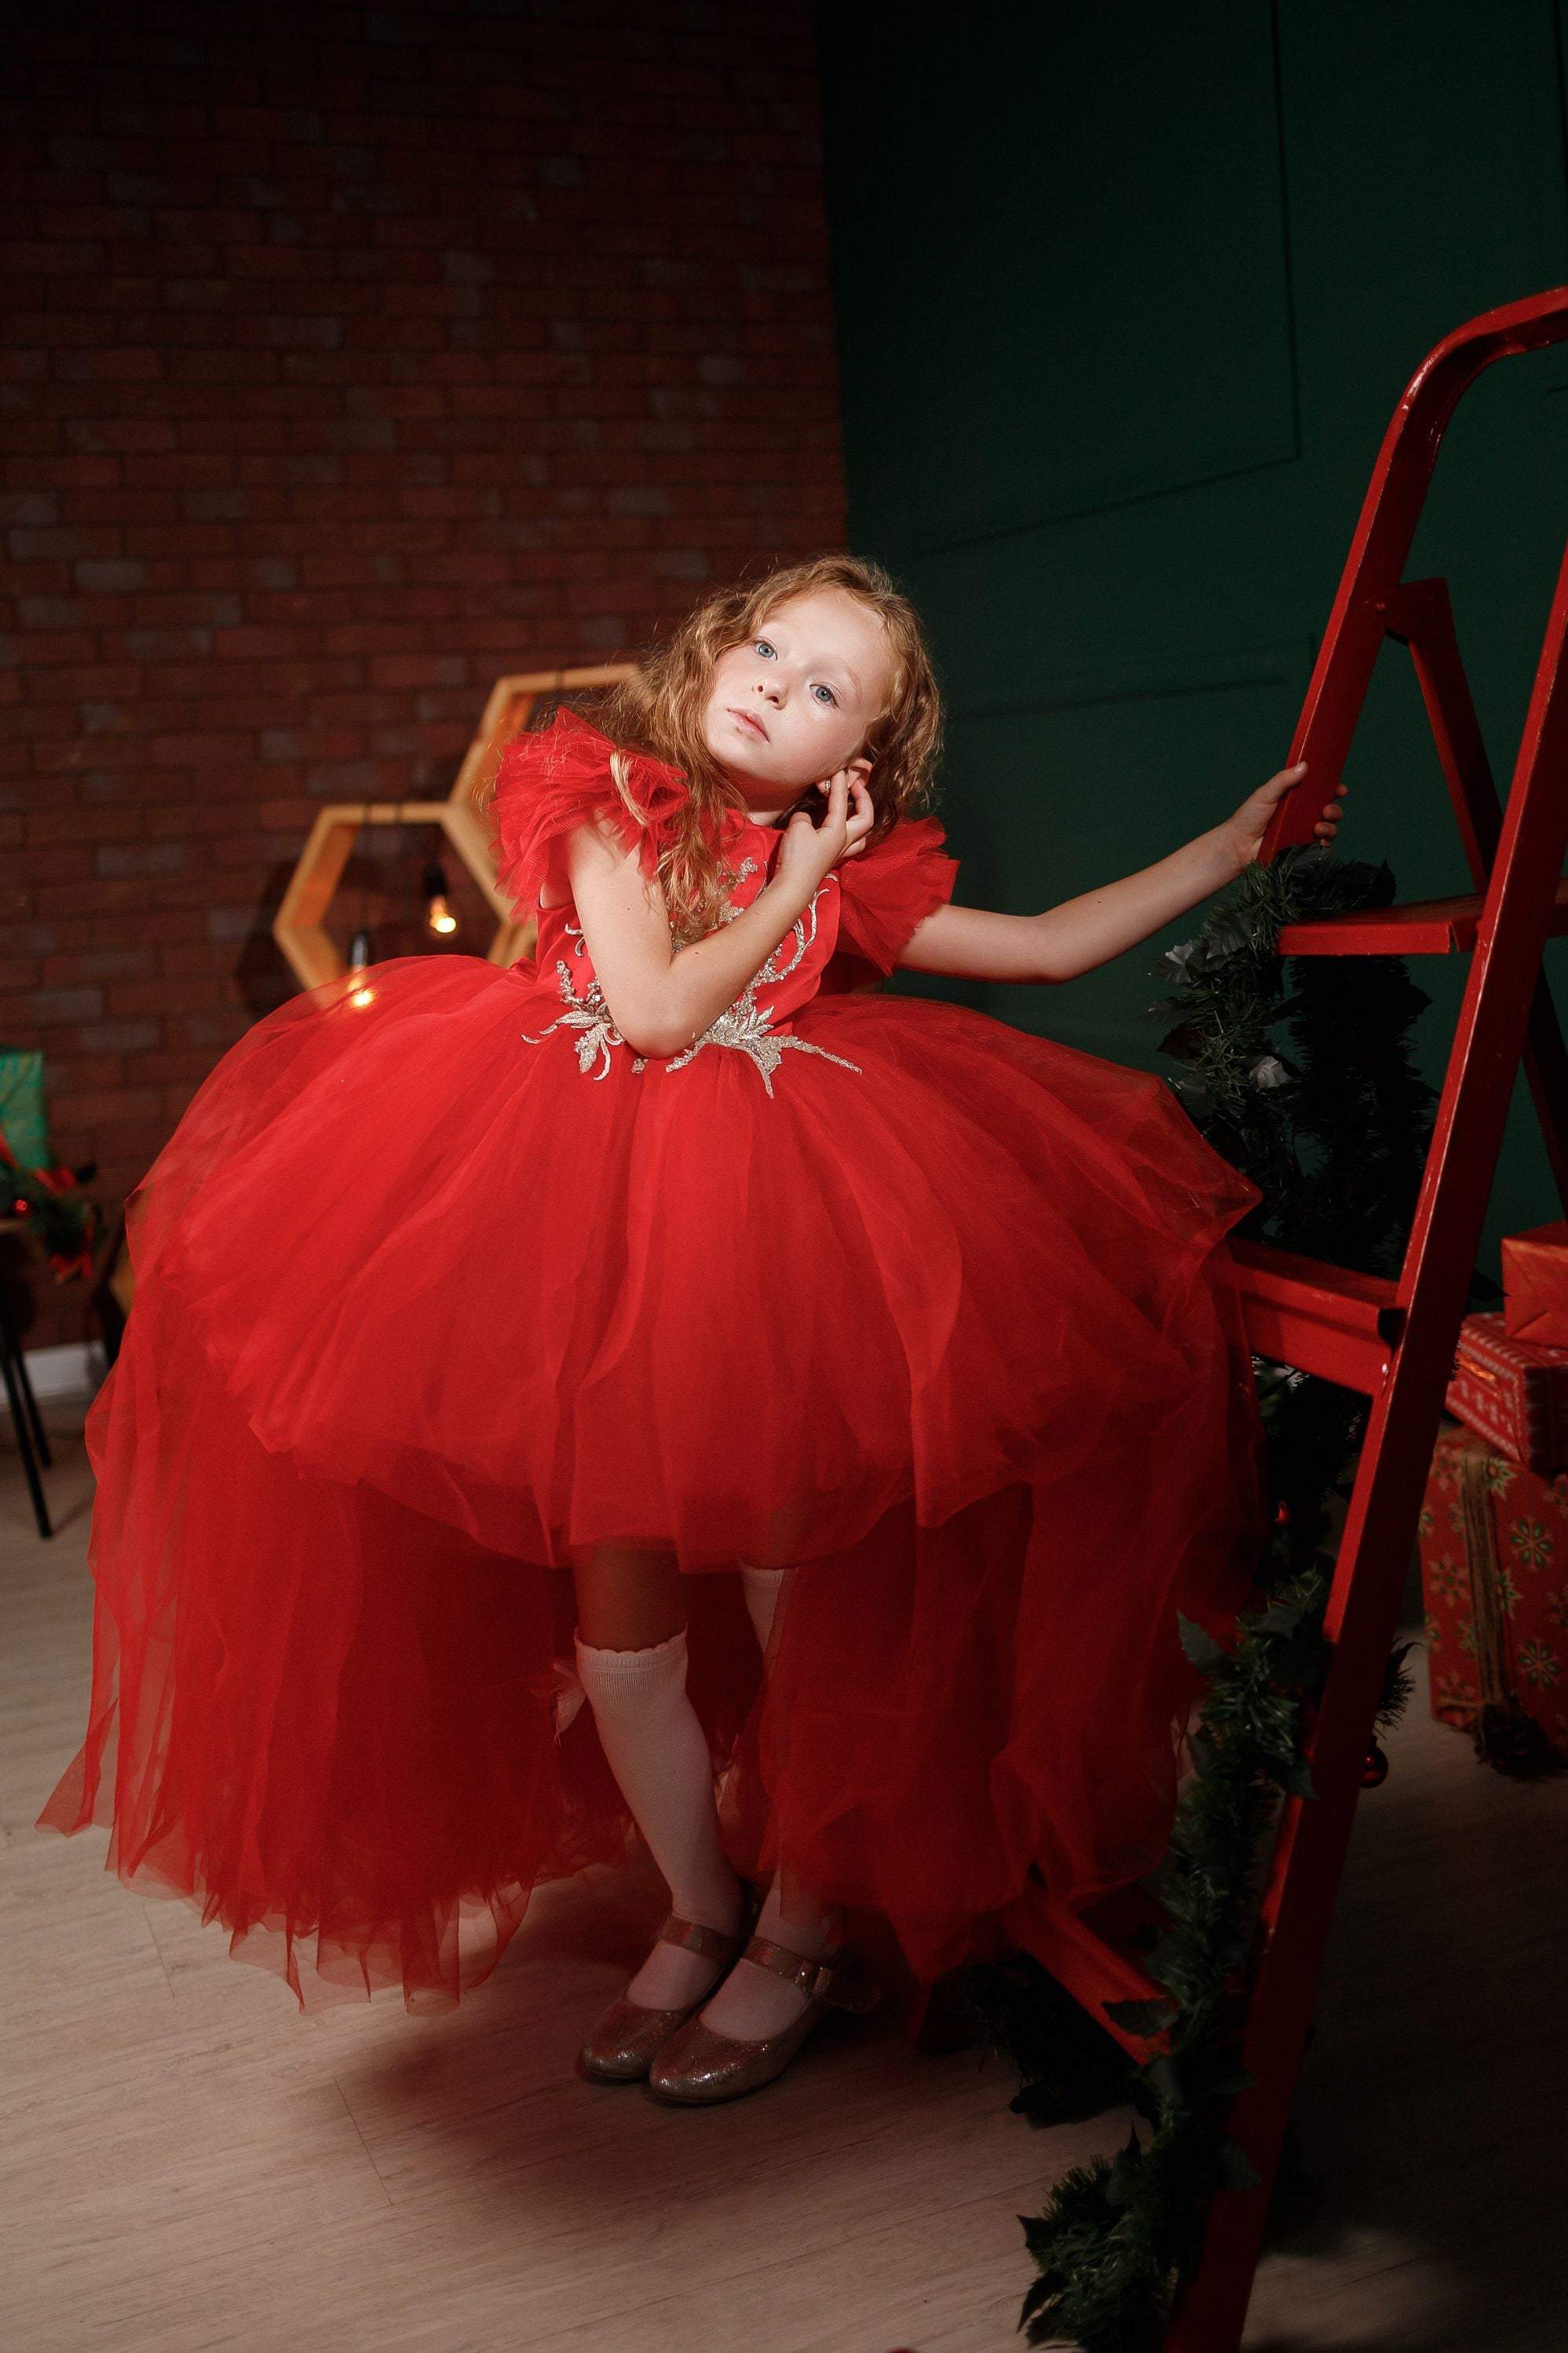 Spanish Floral Ball Gown For Girls Royal Lolita Infant Princess Dress With  Lace Accents Perfect For Birthdays, Christening And Boutique Clothes Style  210615 From Bai09, $39.88 | DHgate.Com